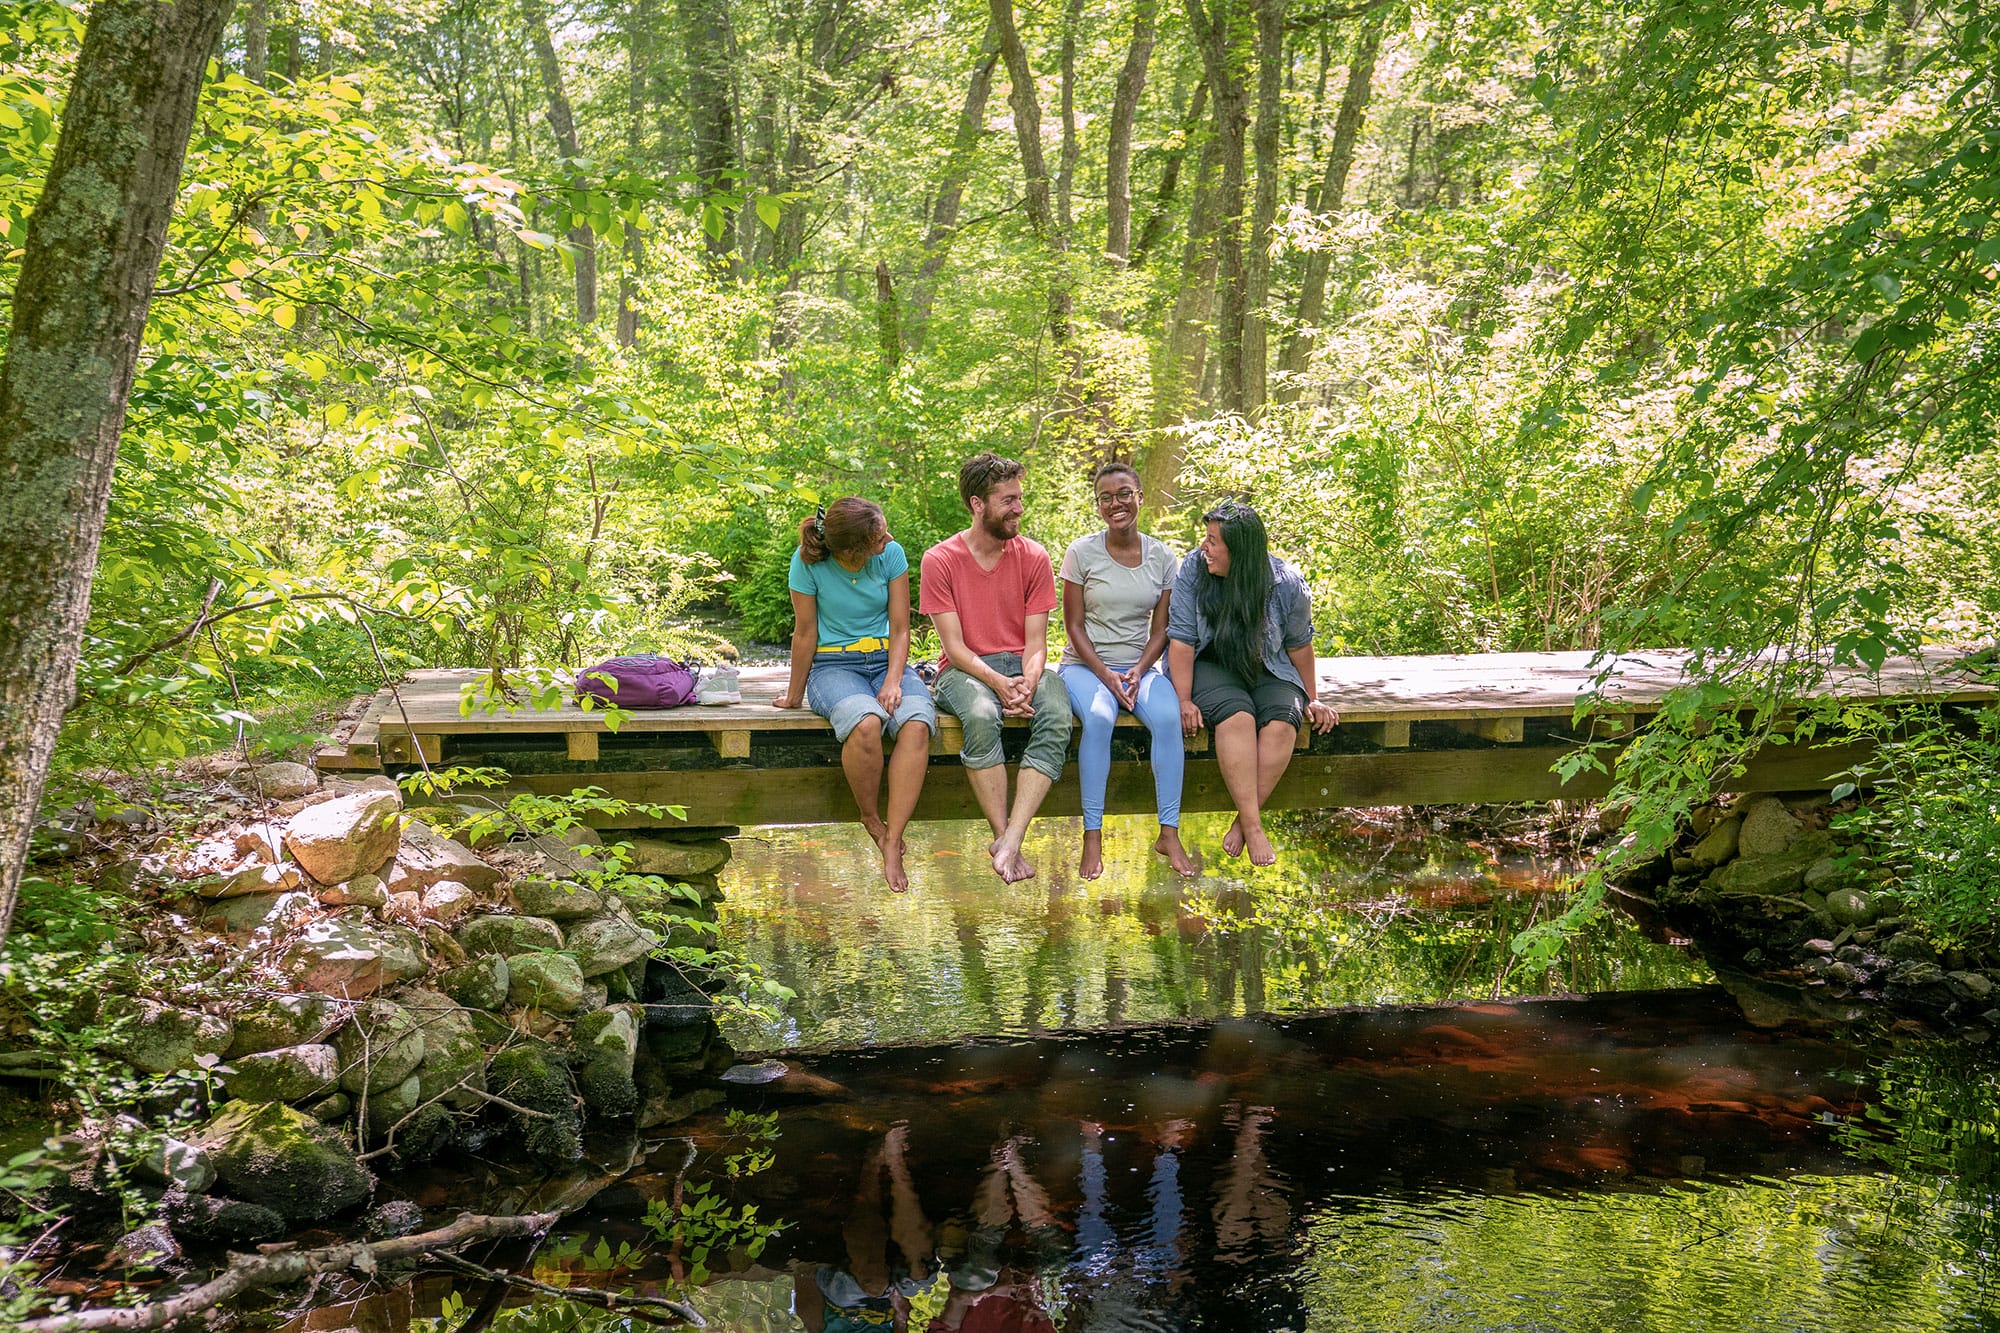 A group of people sitting on a bridge in a wooded area.